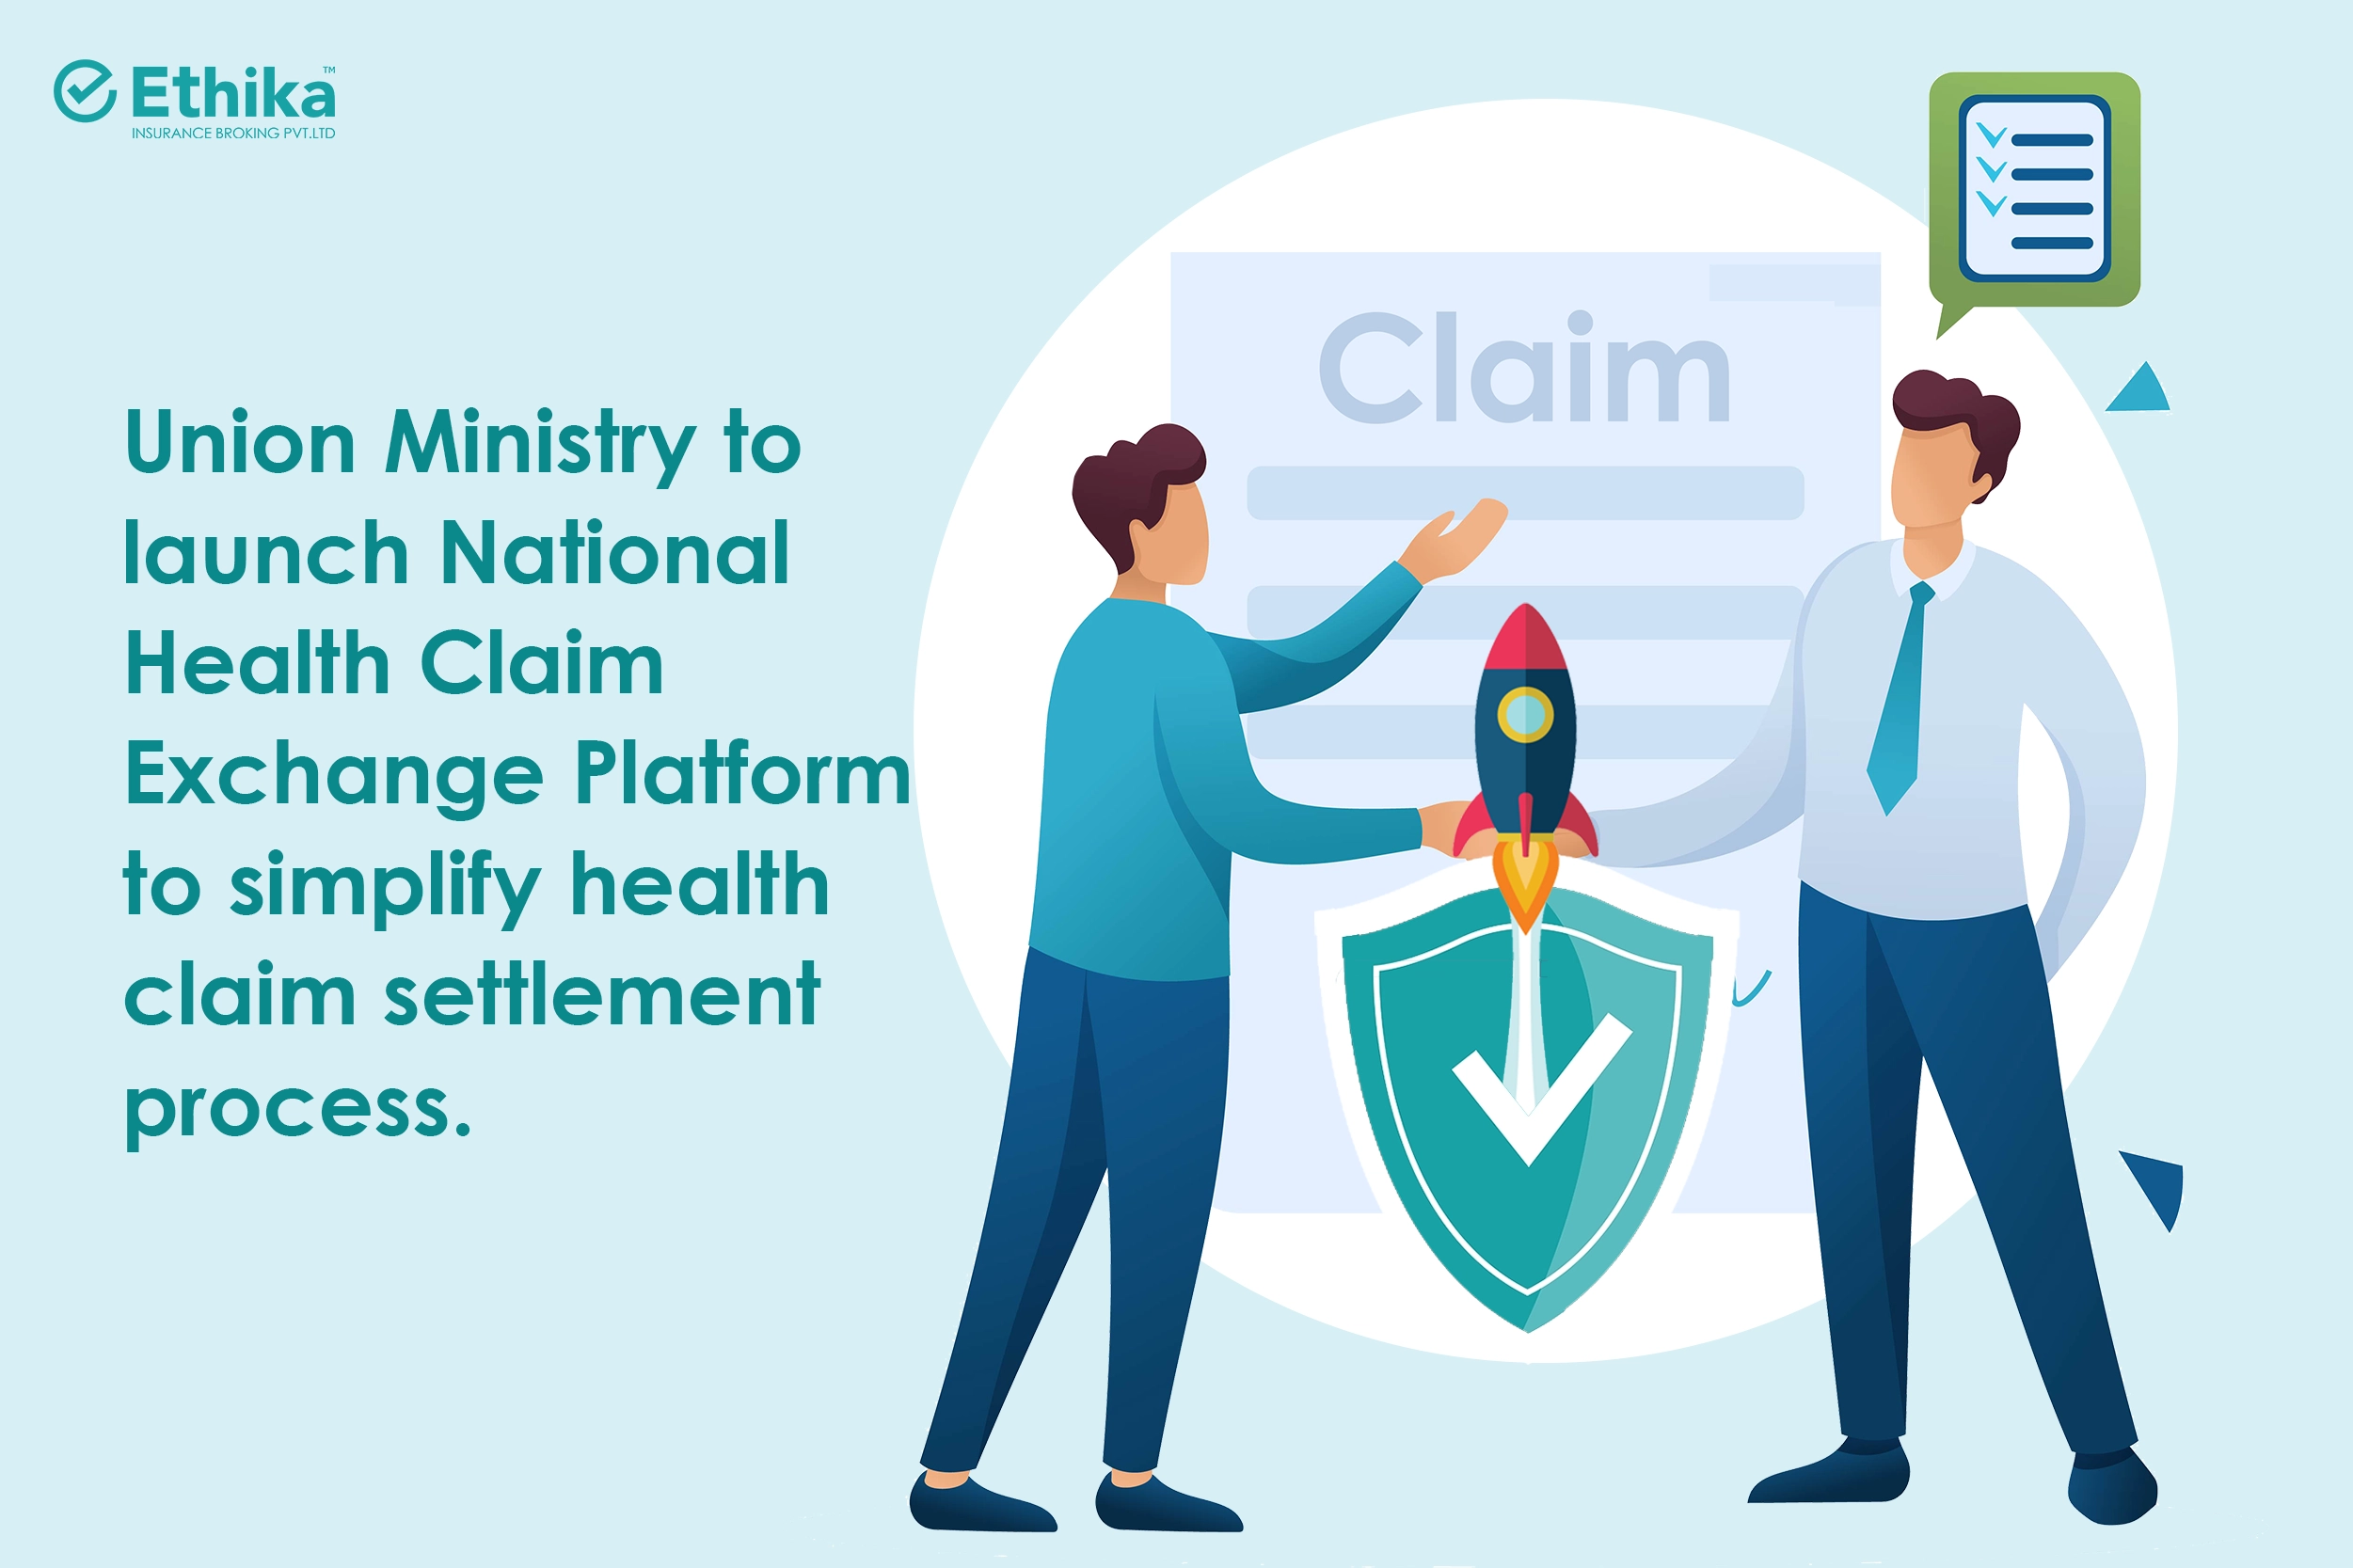 Union Ministry Launches National Health Claim Exchange Platform to Simplify Health Insurance Settlements